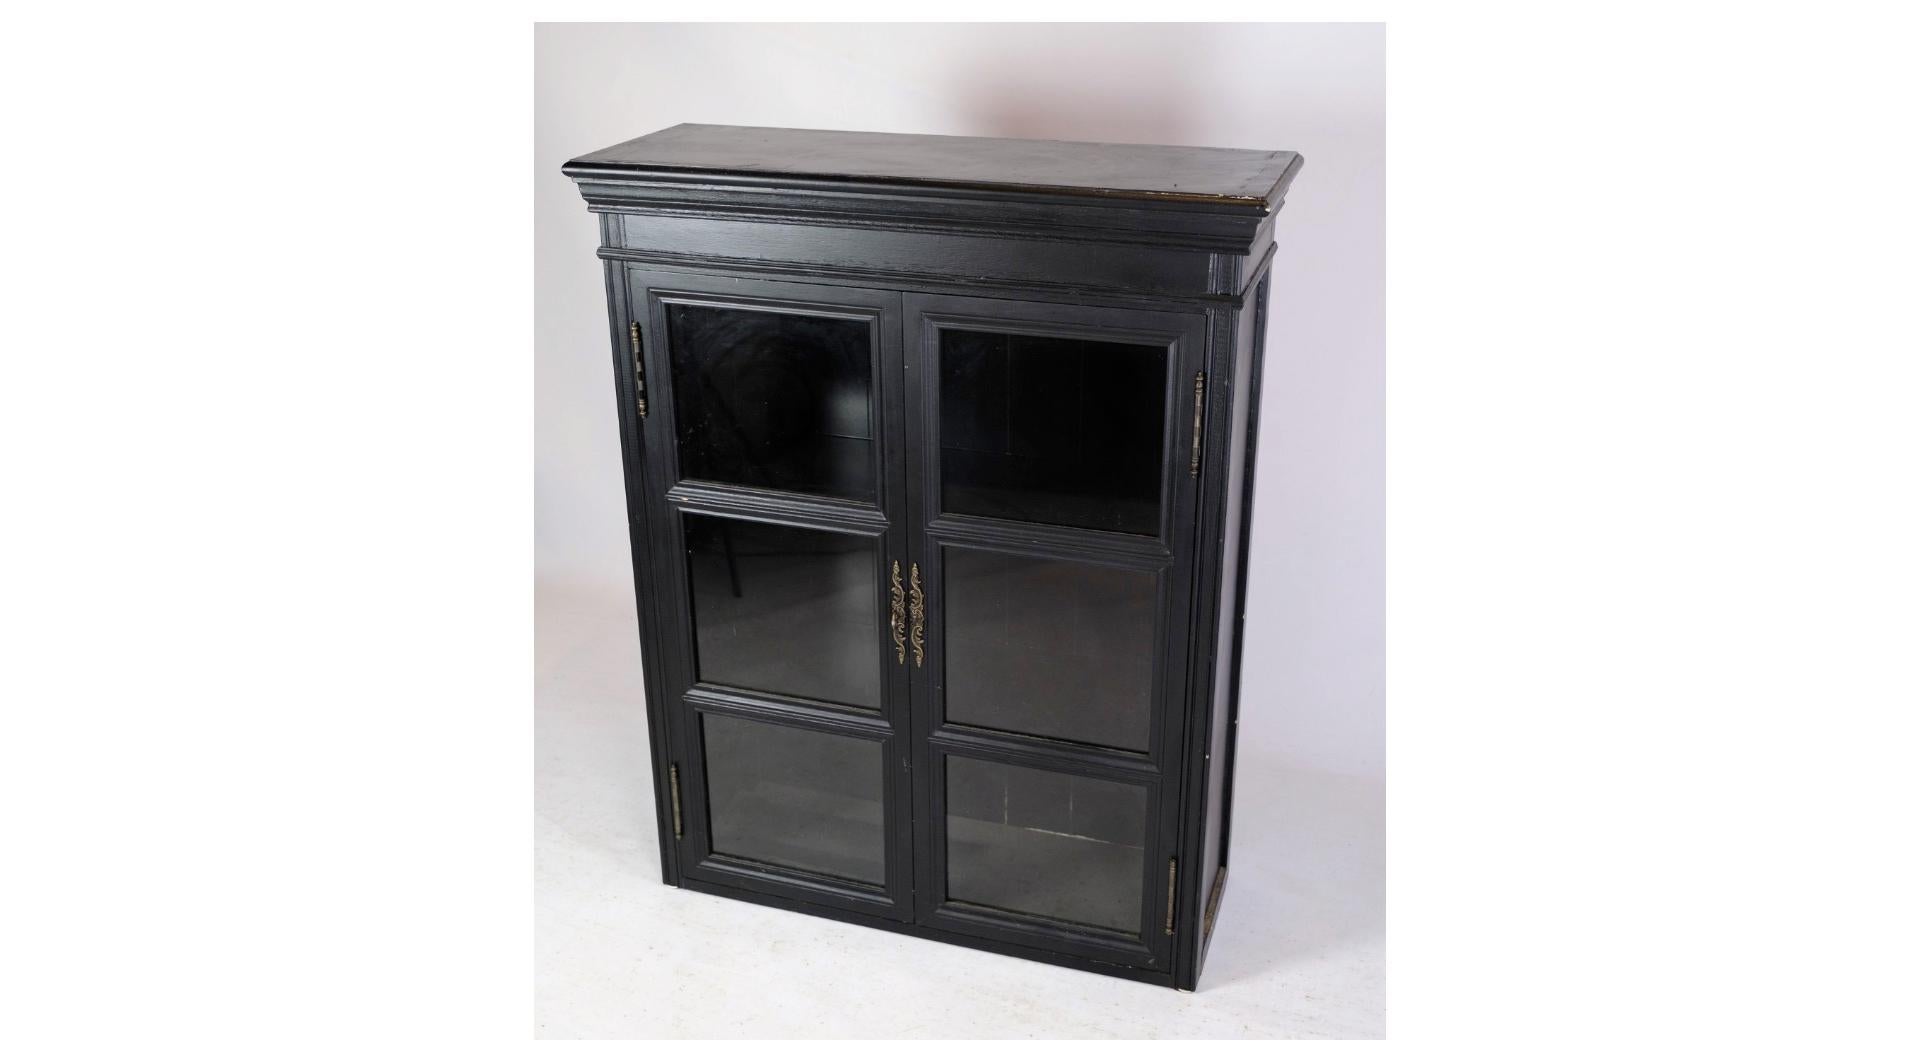 This hanging display case in a deep navy blue color is an iconic piece from the 1970s era. With its sleek design and bold color choices, it adds a touch of retro charm to any room.

The display case has a stylish and functional design with glass